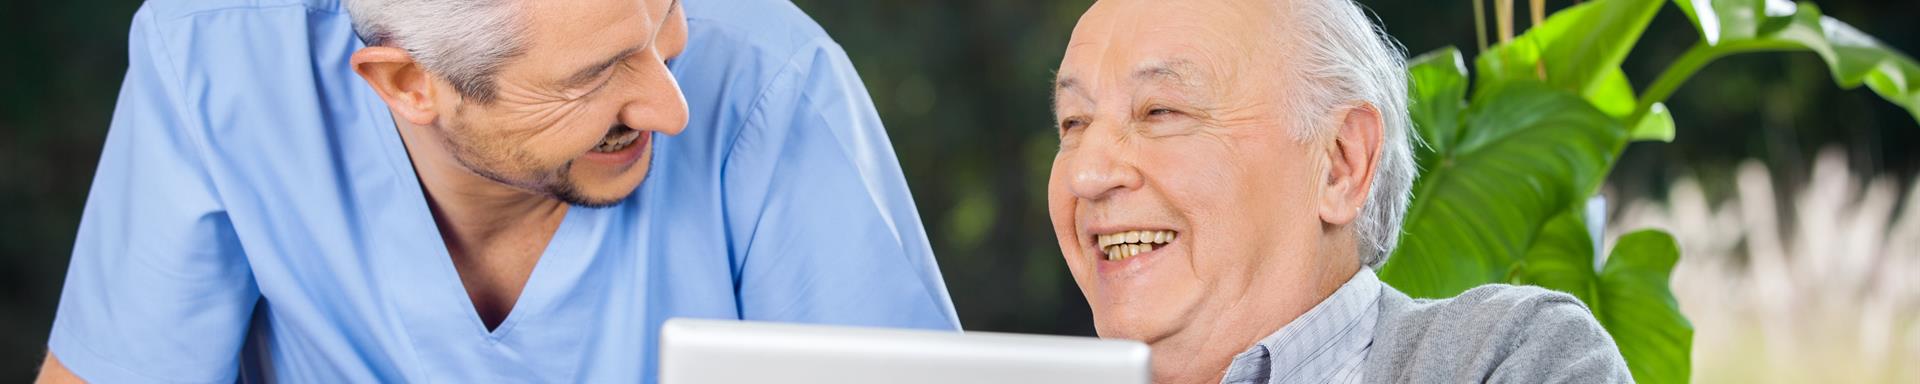 Male caretaker and senior man laughing while using tablet computer at nursing home porch